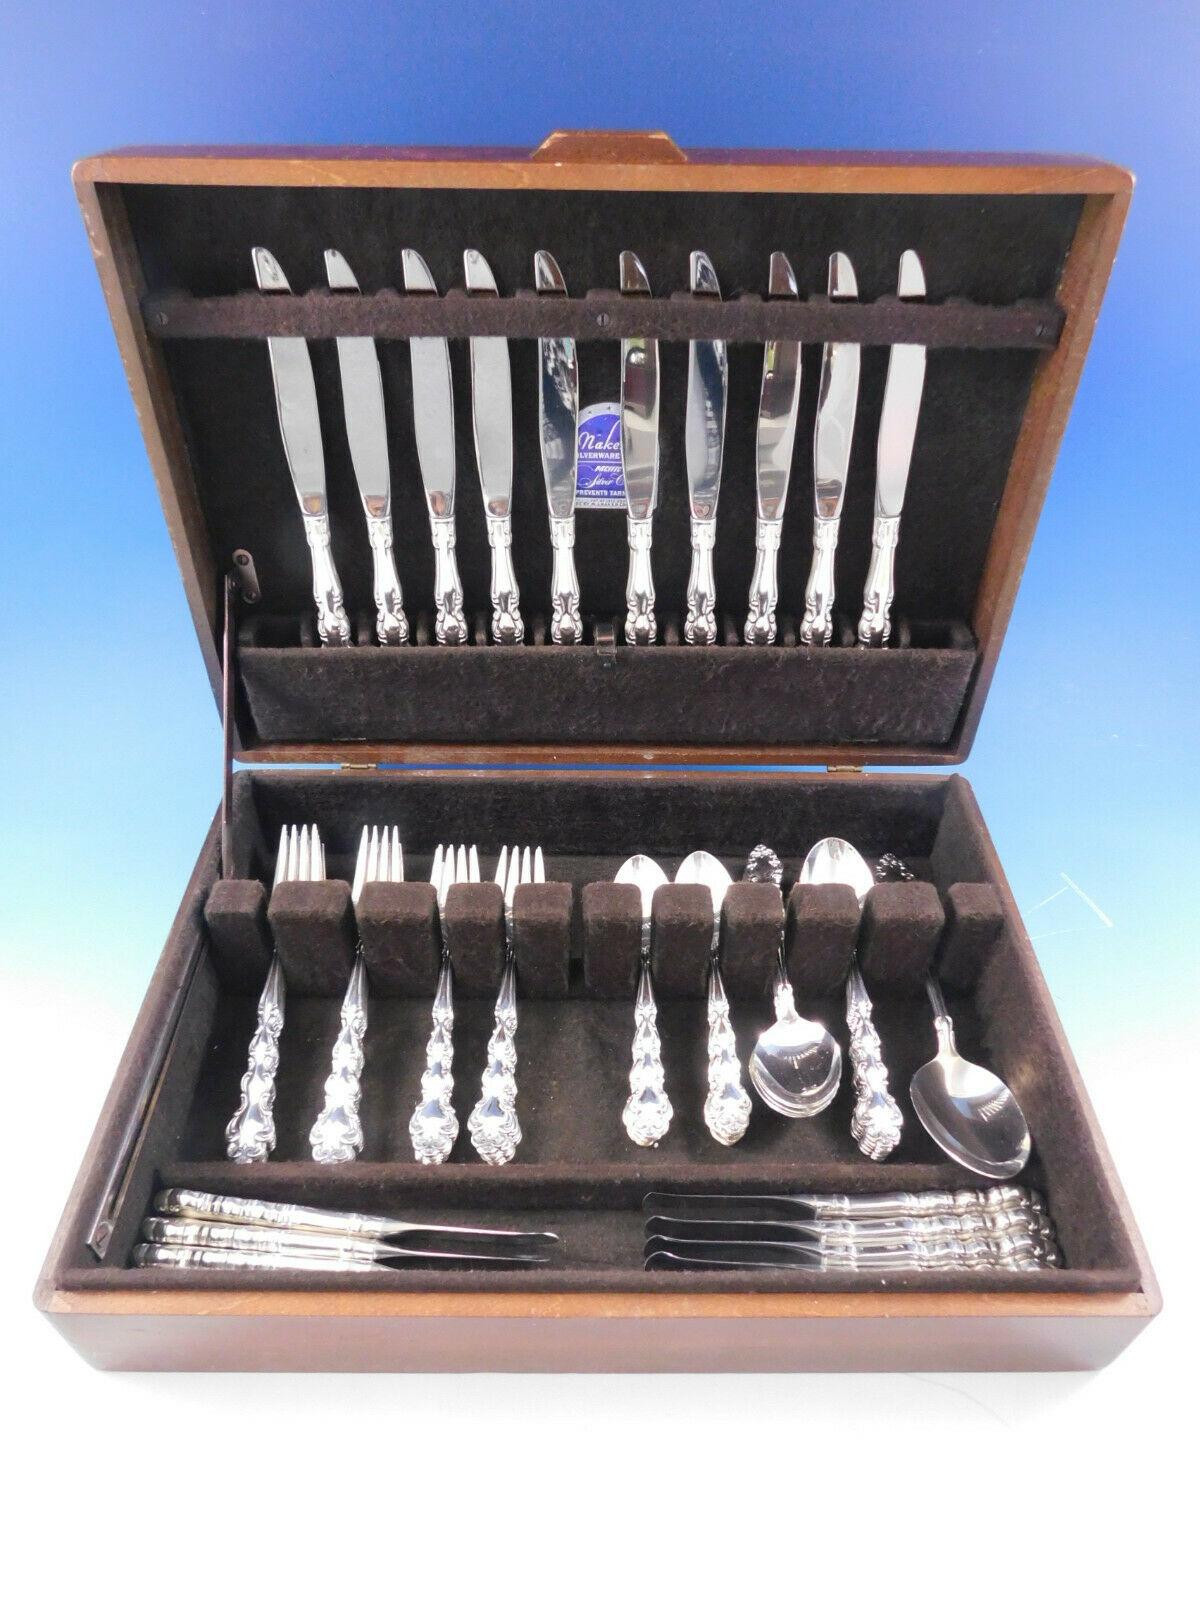 Modern Baroque by Community / Oneida silver plate flatware set - 61 pieces. This set includes:

10 knives, 9 1/8